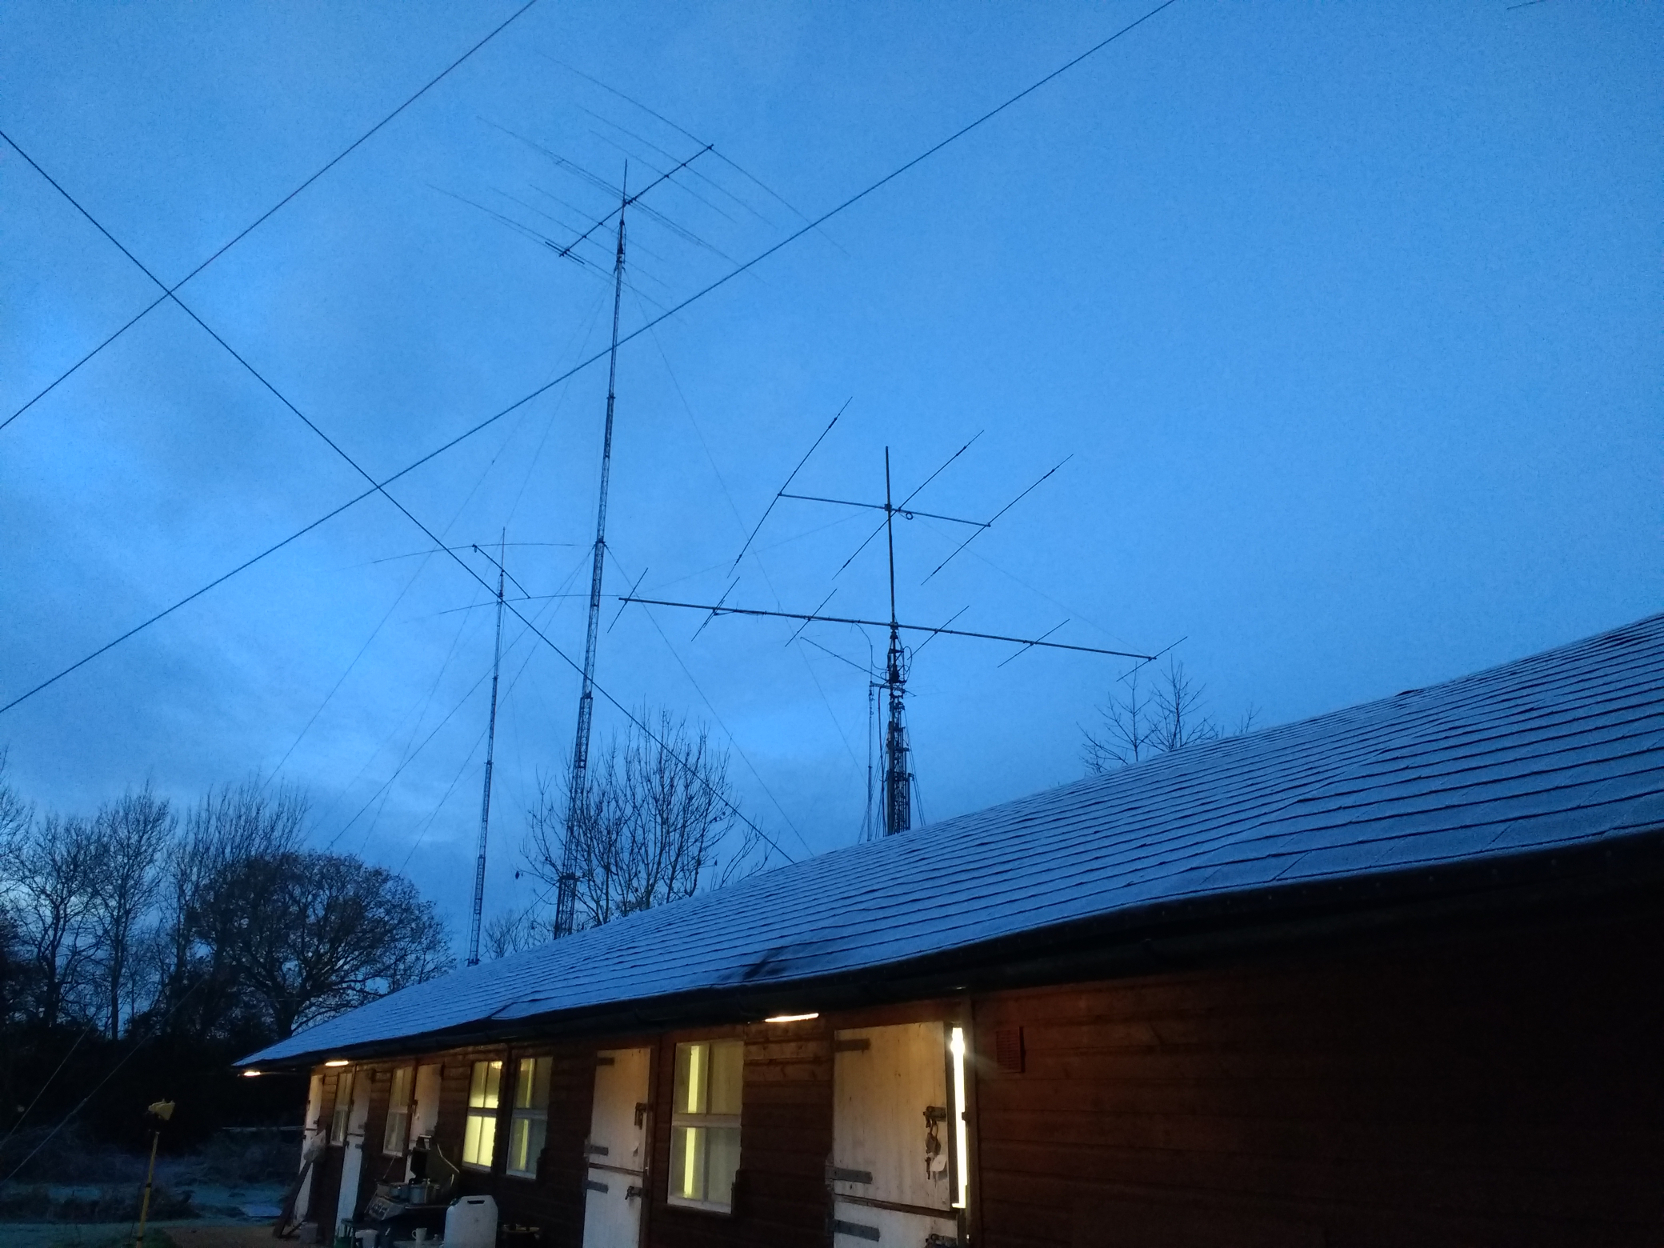 The m6T shacks and some antennas at dawn, it was cold.